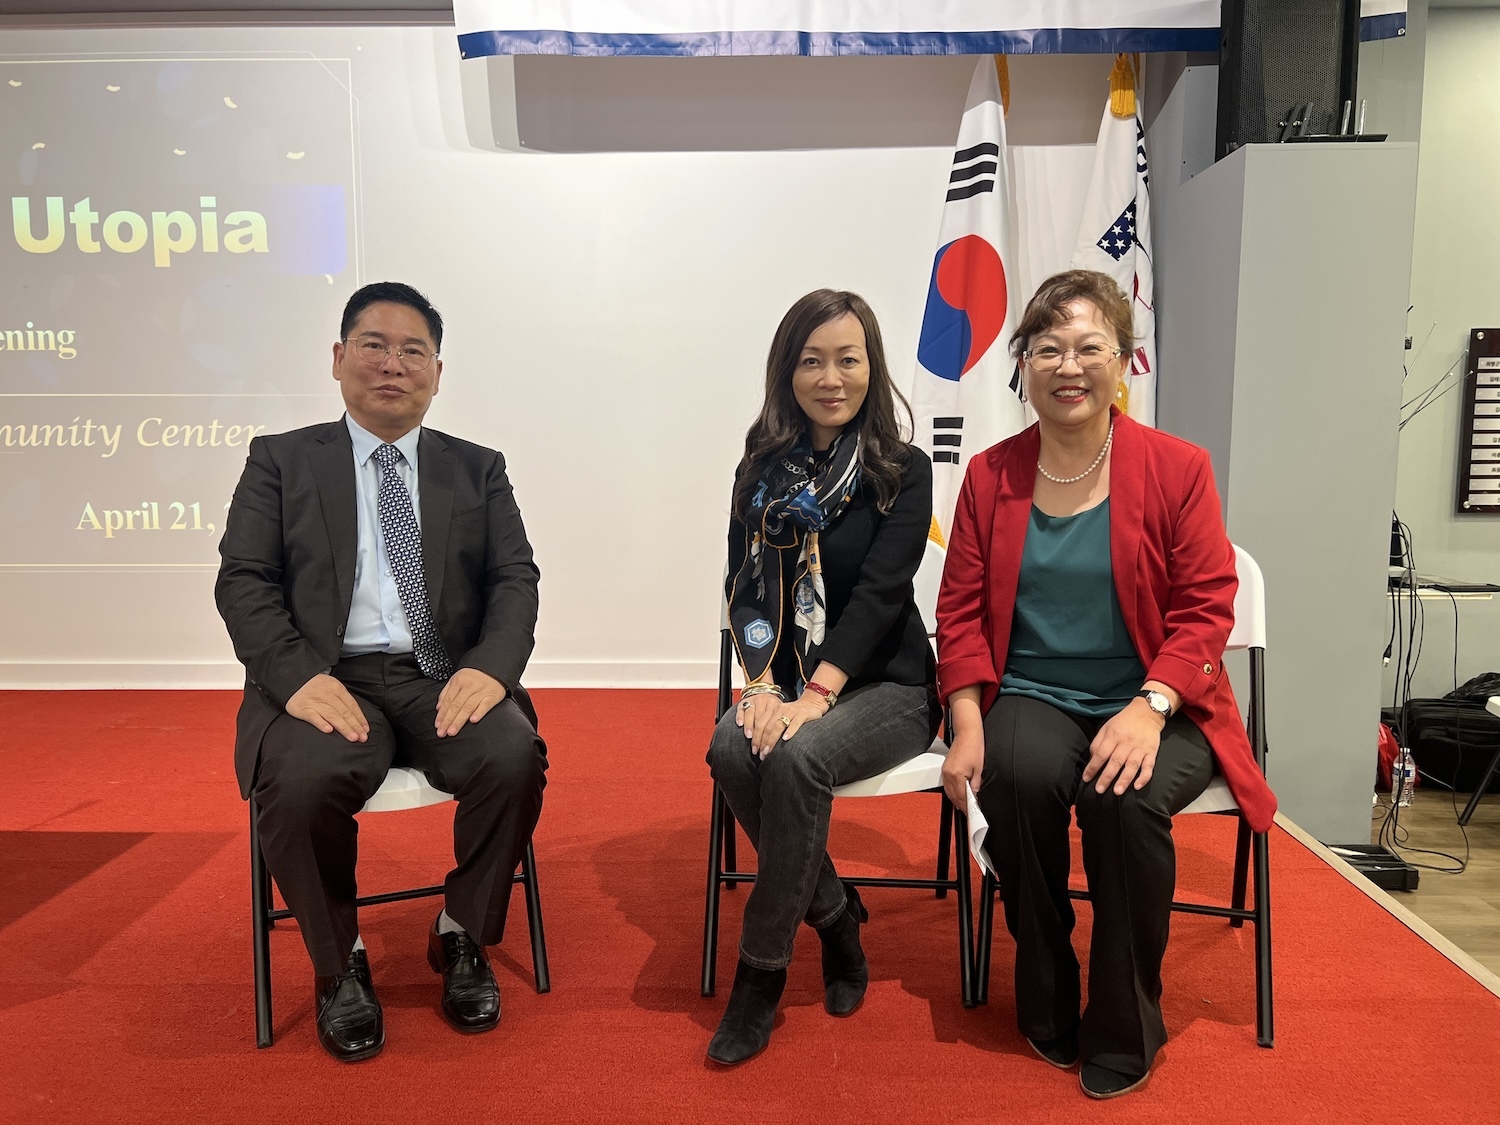 Three individuals are seated on white chairs in front of a presentation screen and a South Korean flag in a community center, ready to discuss the human rights crisis in North Korea as part of the Beyond Utopia initiative.